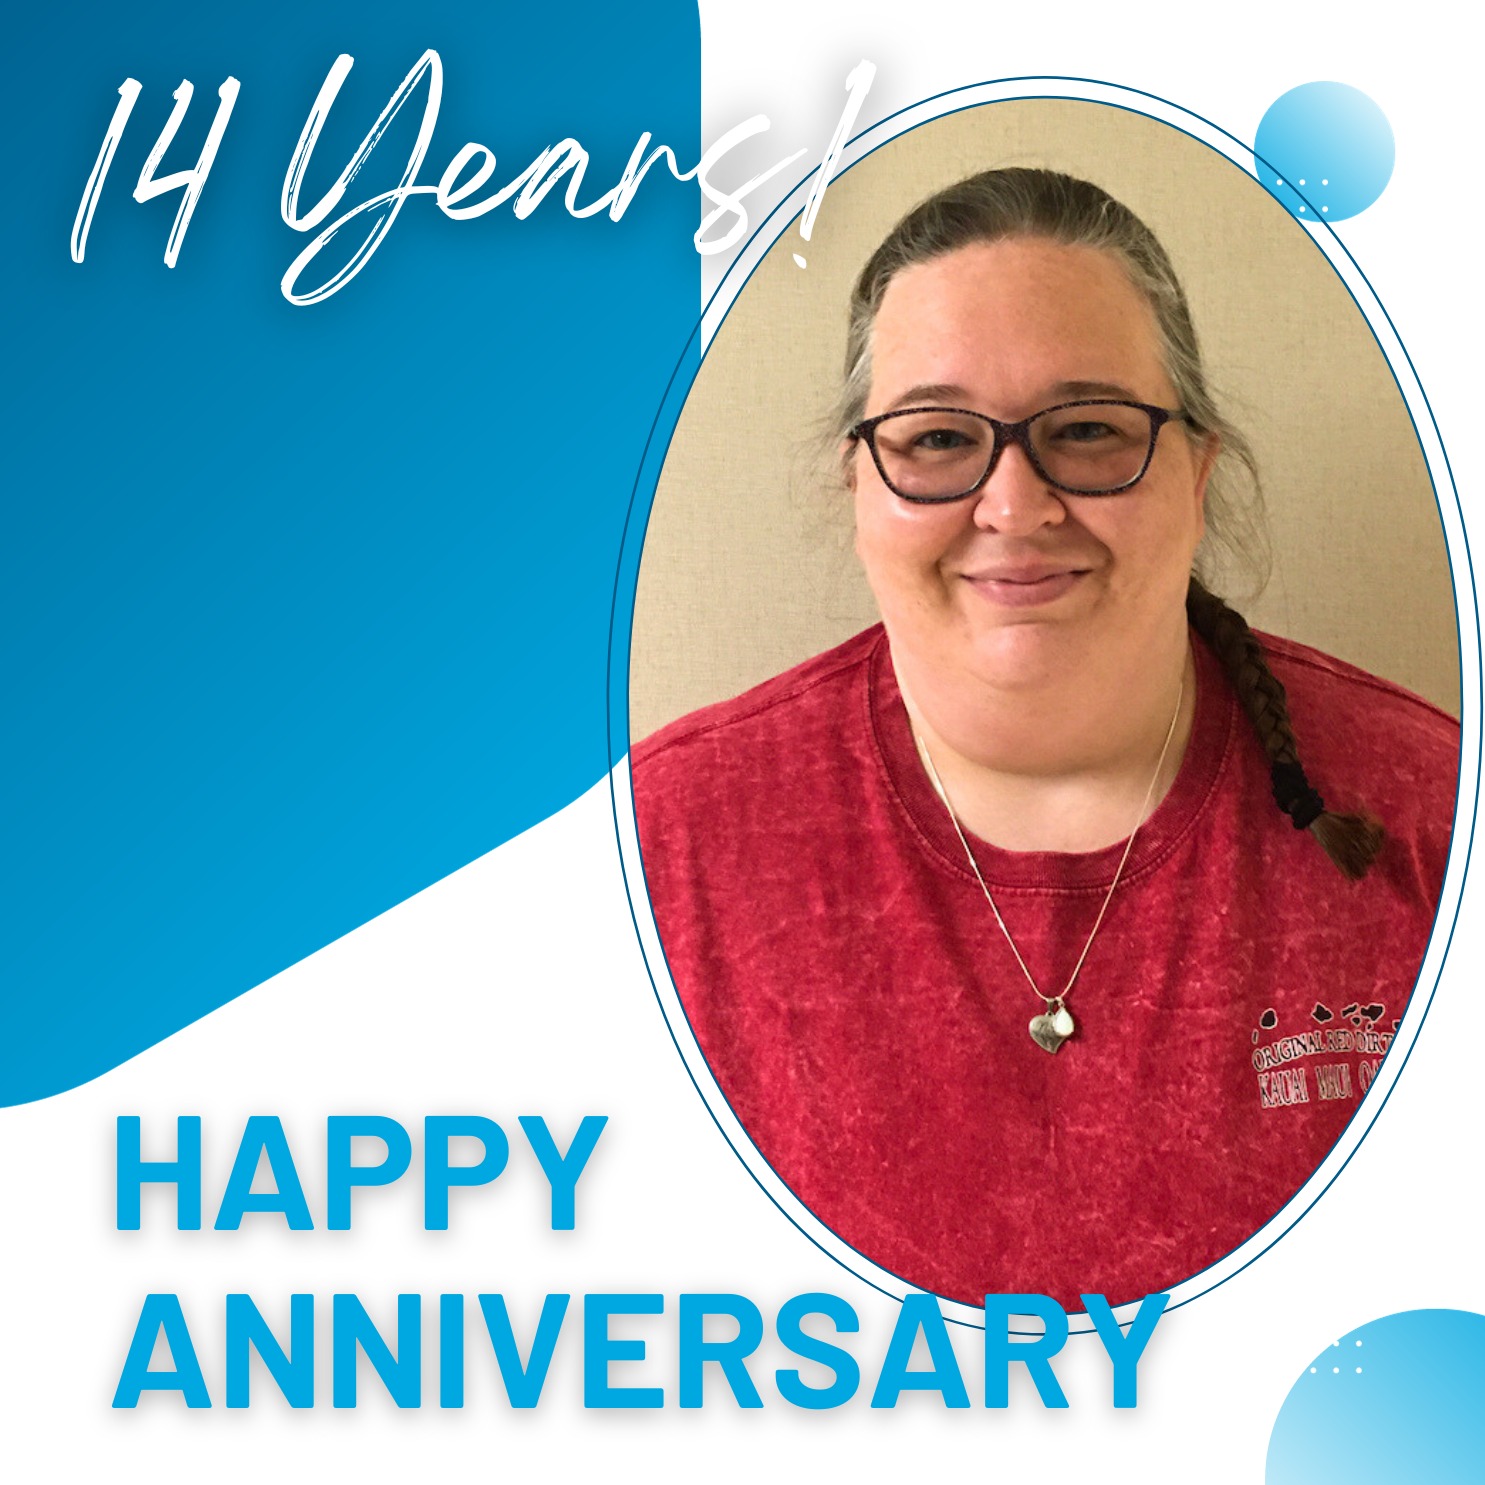 ðŸŽ‰ðŸŒŸ Cheers to 14 Years of Culinary Excellence! ðŸŒŸðŸŽ‰ Congratulations to Joyel Peden, our incredible Certified Dietary Manager, on reaching this impressive work anniversary milestone. Joyel's dedication to ensuring nutritious and delicious meals for our residents has been the heart of our dining experience.